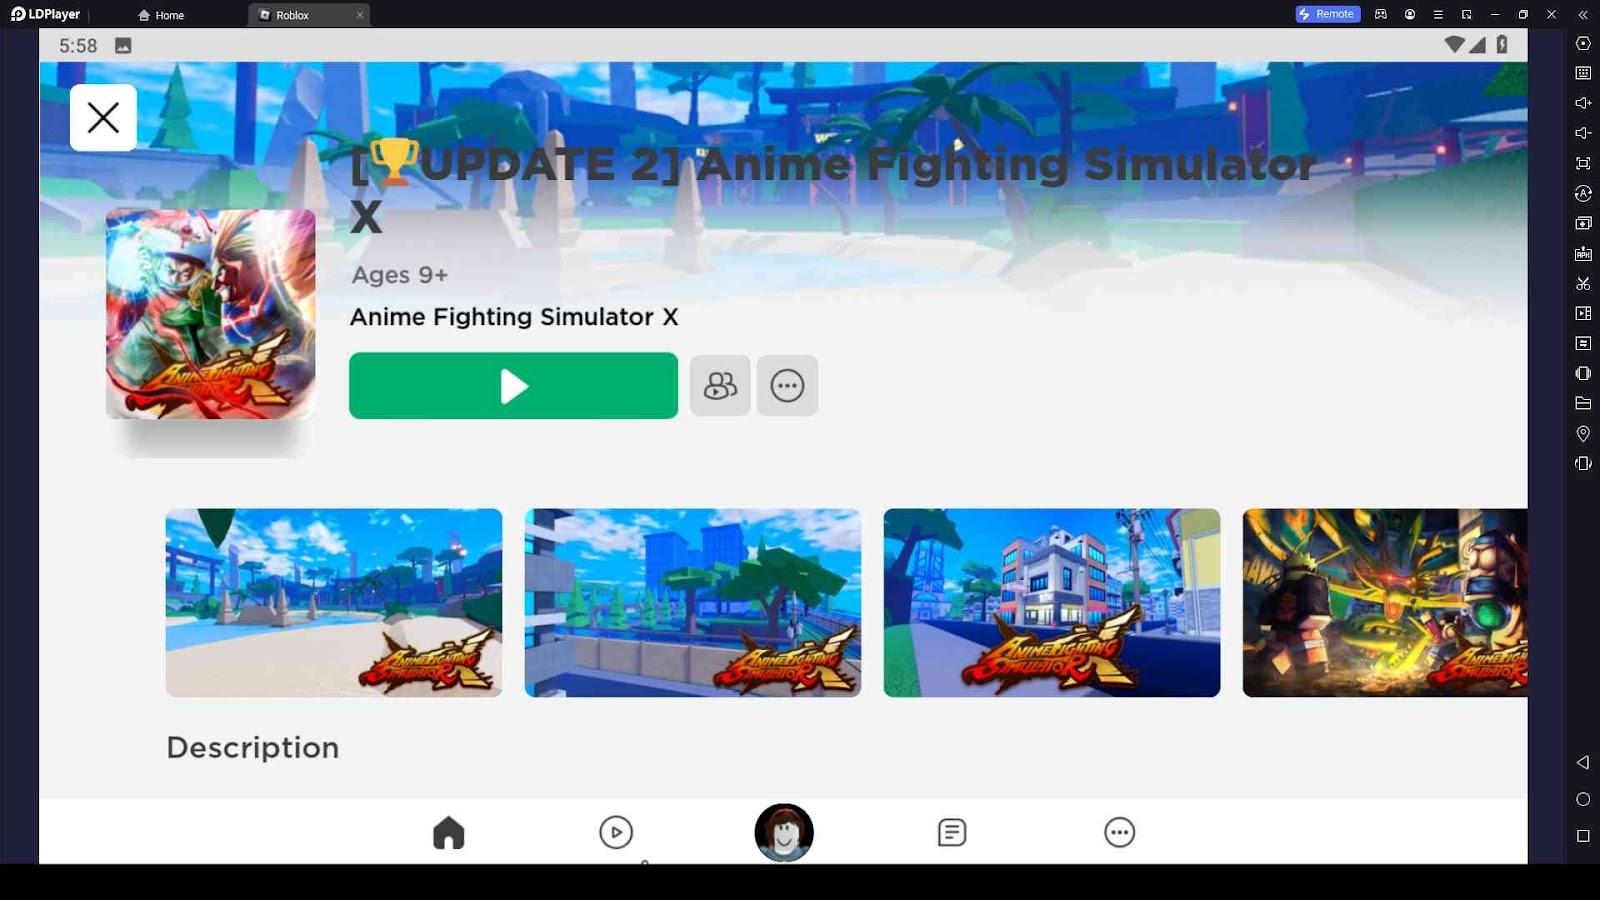 All Anime Fighting Simulator X codes to redeem for boosts, Chikara